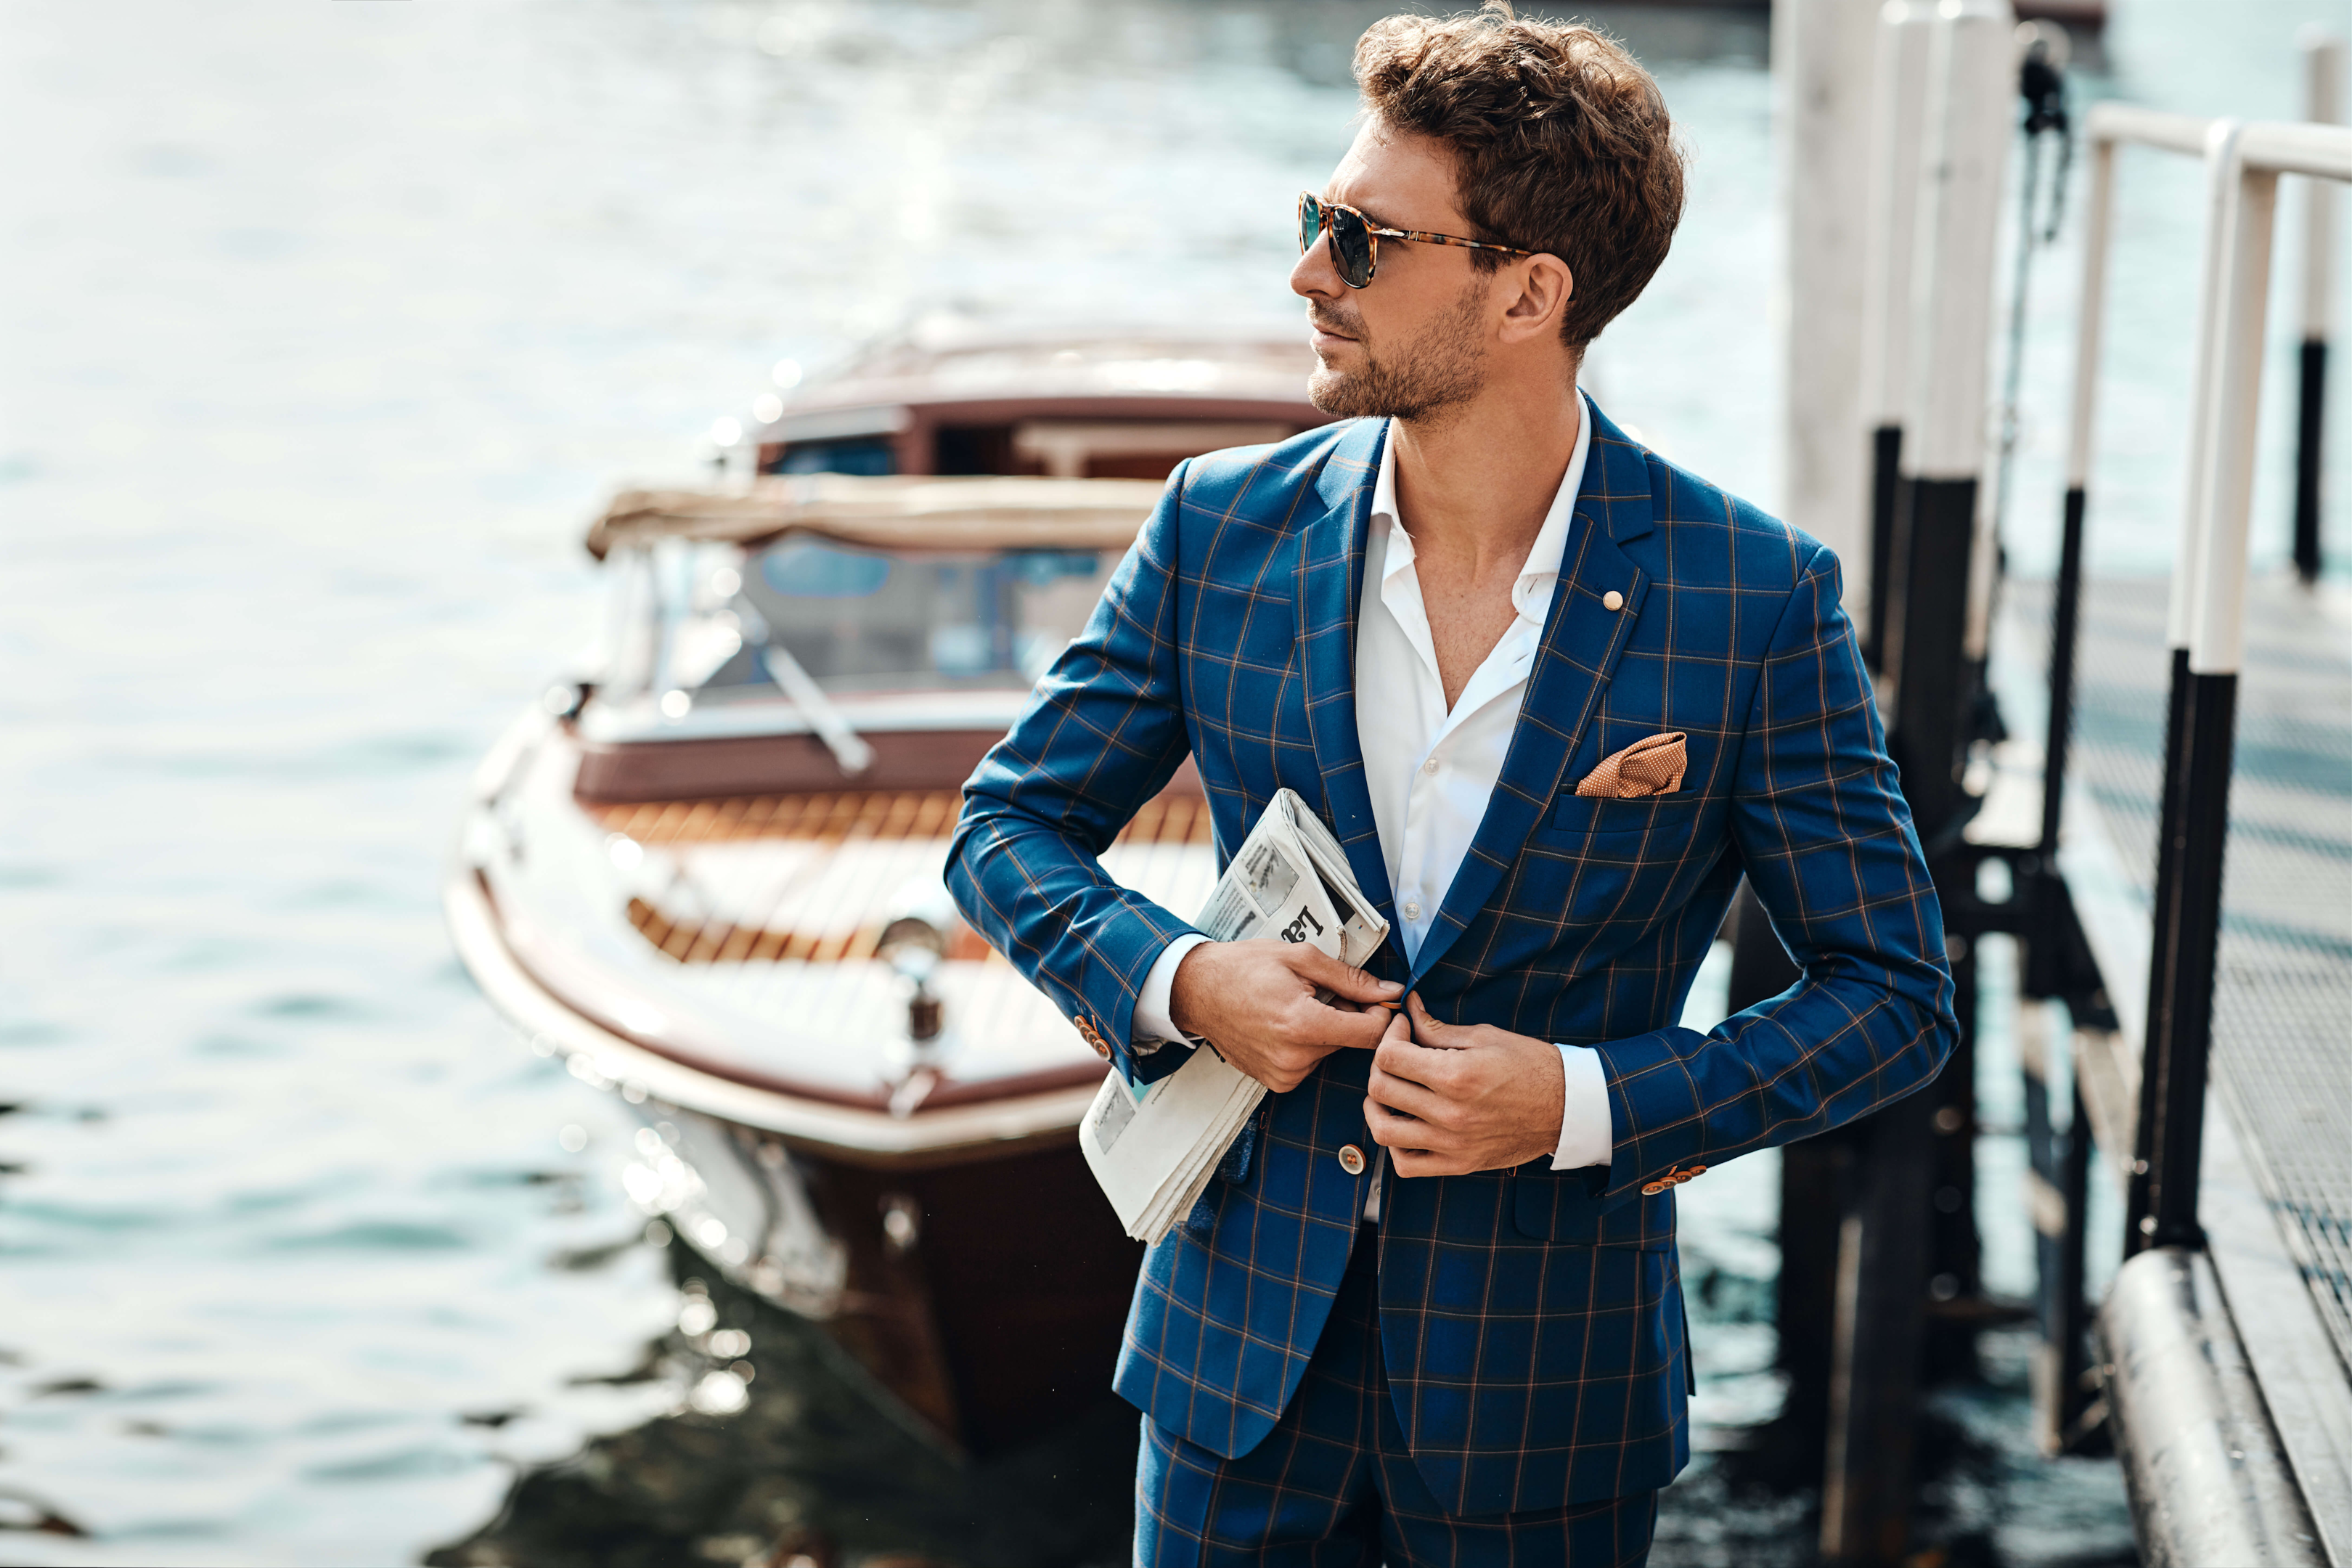 Wearing check patterned suits and sunglasses.